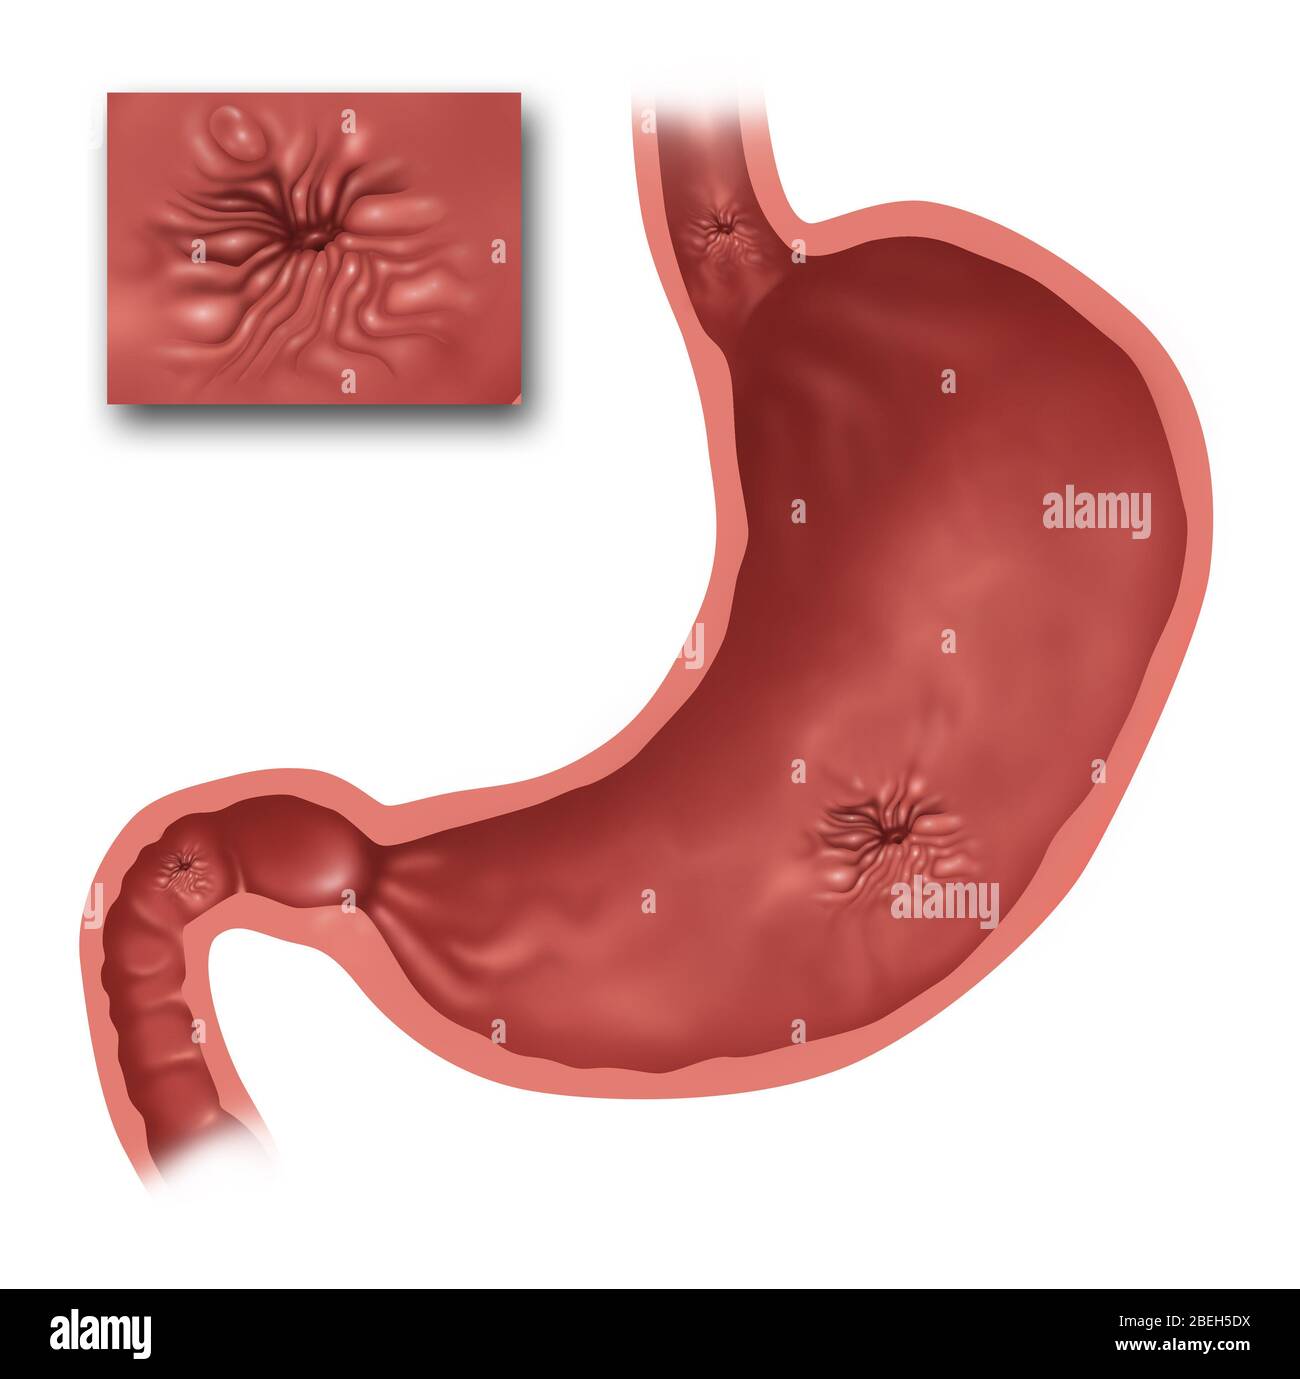 Illustration of the stomach with several ulcers present. At top is the esophagus and just below that is an esophageal ulcer. In the stomach a gastric ulcer is present, and at the bottom left is a duodenal ulcer in the small intestine. Inset is a close up of a peptic ulcer. Stock Photo